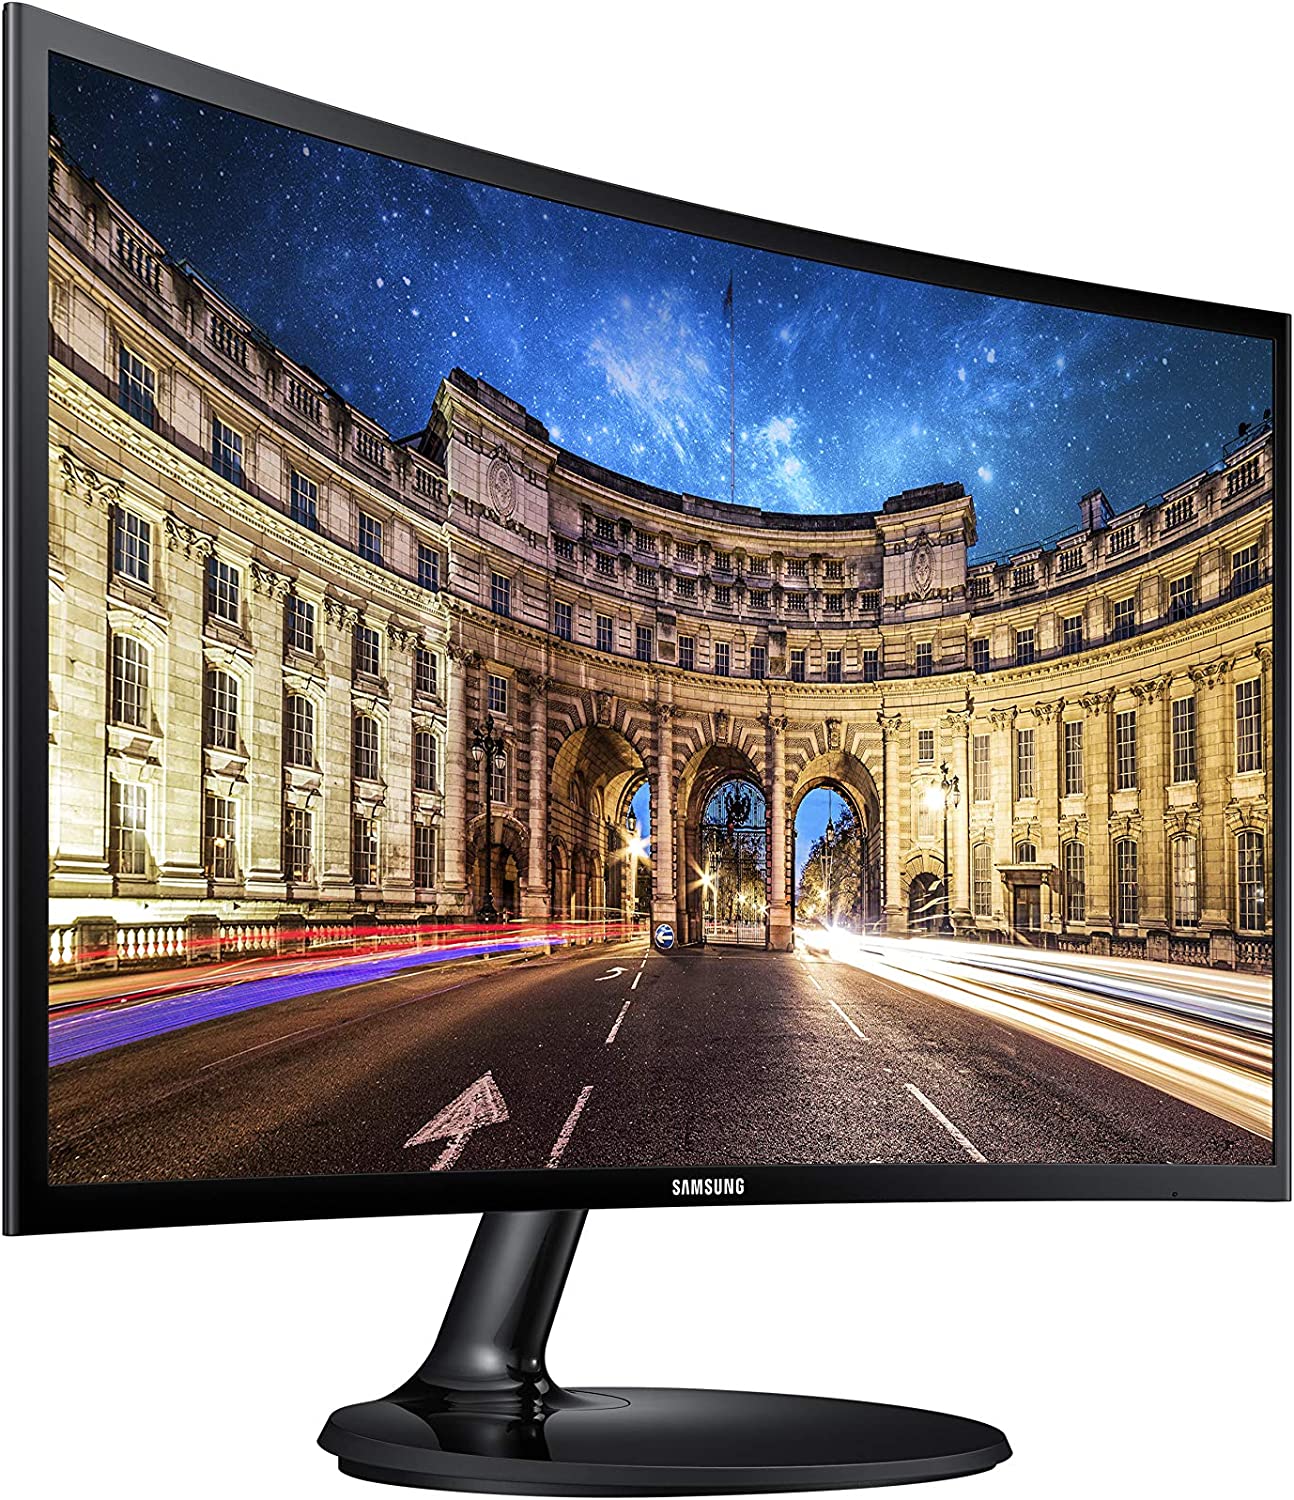 SAMSUNG LC24F390FHNXZA 24-inch Curved LED FHD 1080p [...]